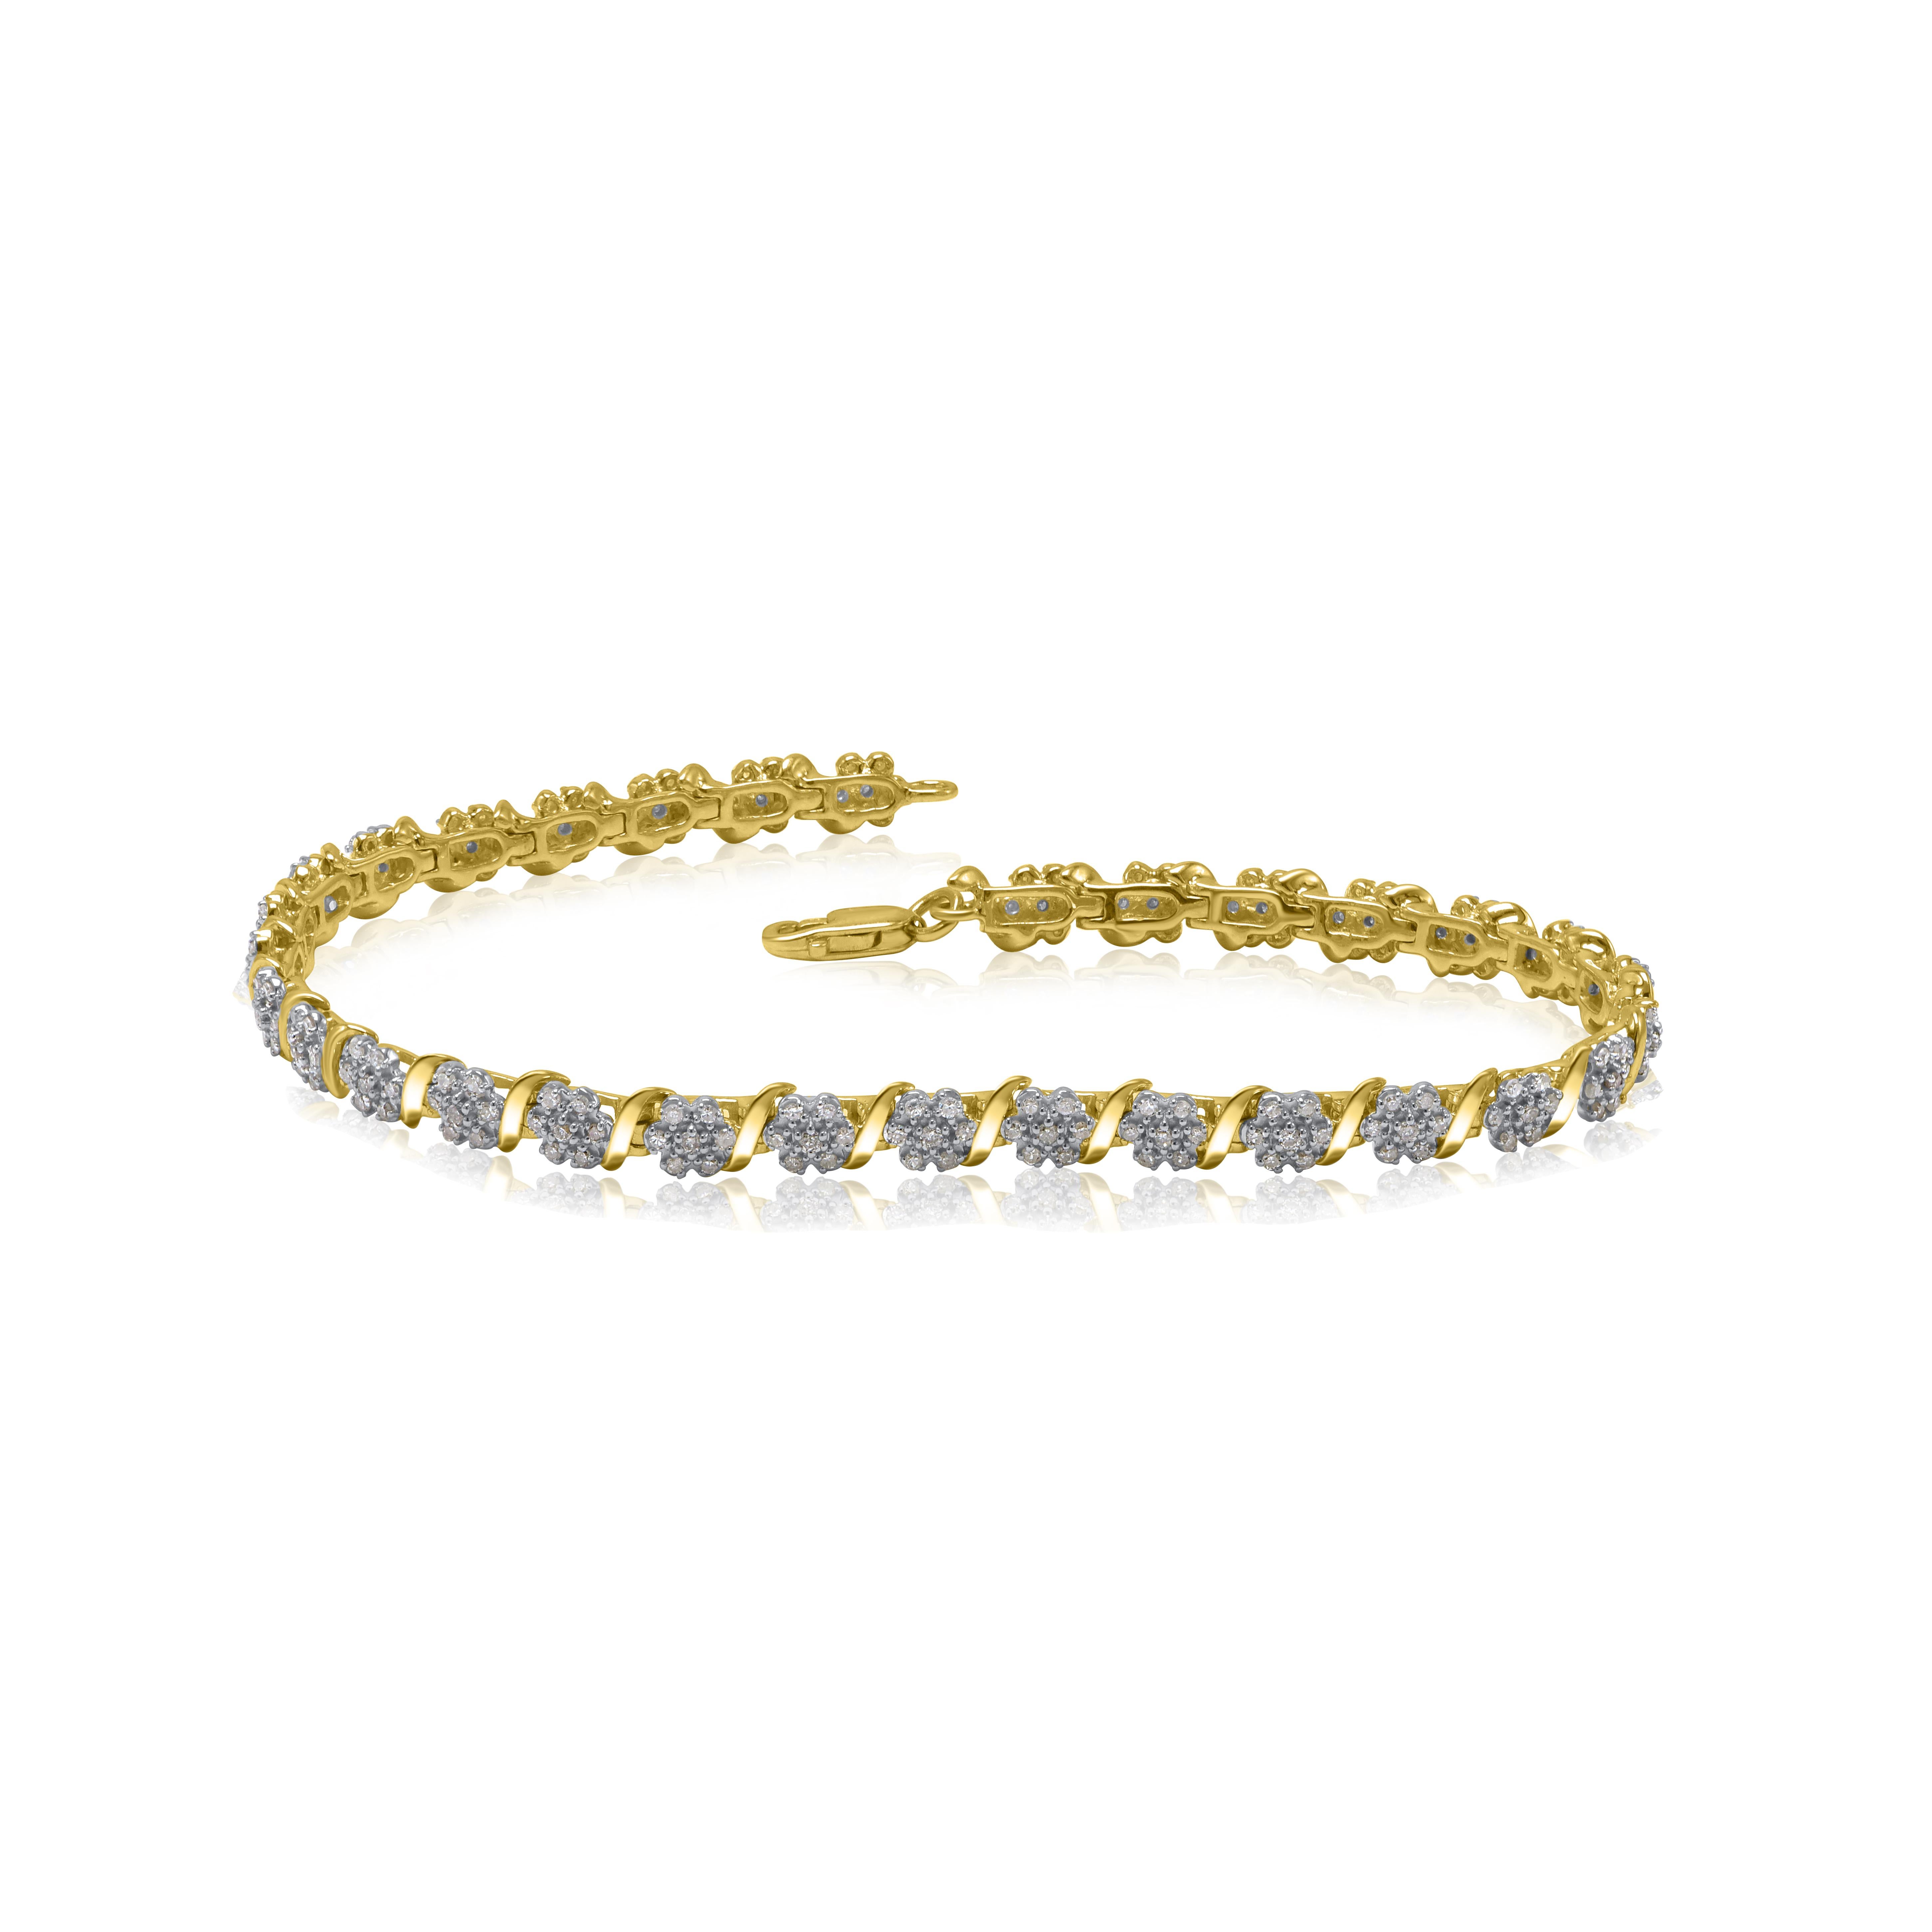 A graceful addition to her wardrobe, this diamond link bracelet brings the perfect touch of sparkle to her look. Beautifully hand-crafted by our inhouse experts in 14 karat yellow gold and embedded with 217 single cut and brilliant cut round diamond